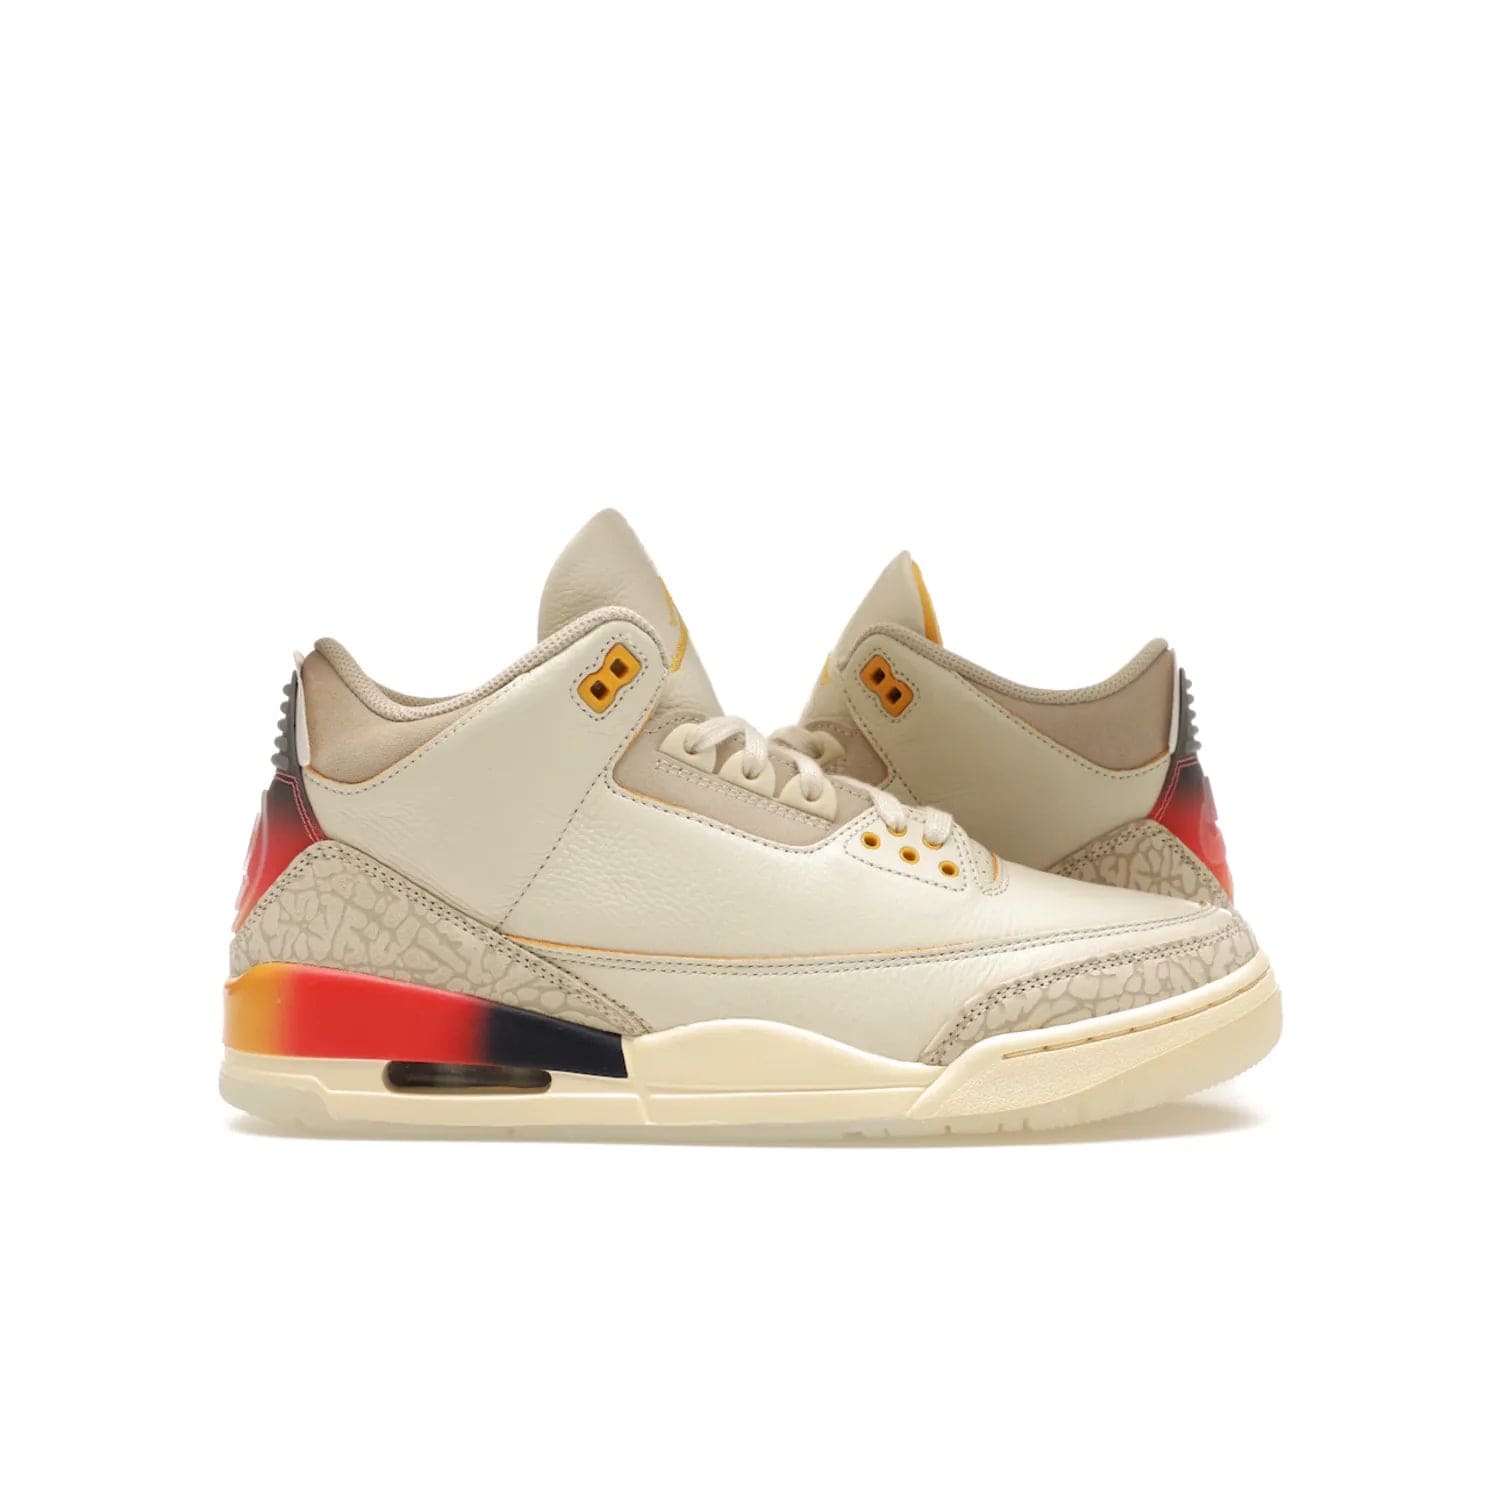 Jordan 3 Retro SP J Balvin Medellín Sunset - Image 1 - Only at www.BallersClubKickz.com - J Balvin x Jordan 3 Retro SP: Celebrate the joy of life with a colorful, homage to the electrifying reggaeton culture and iconic Jordan 3. Limited edition, Sept. 23. $250.